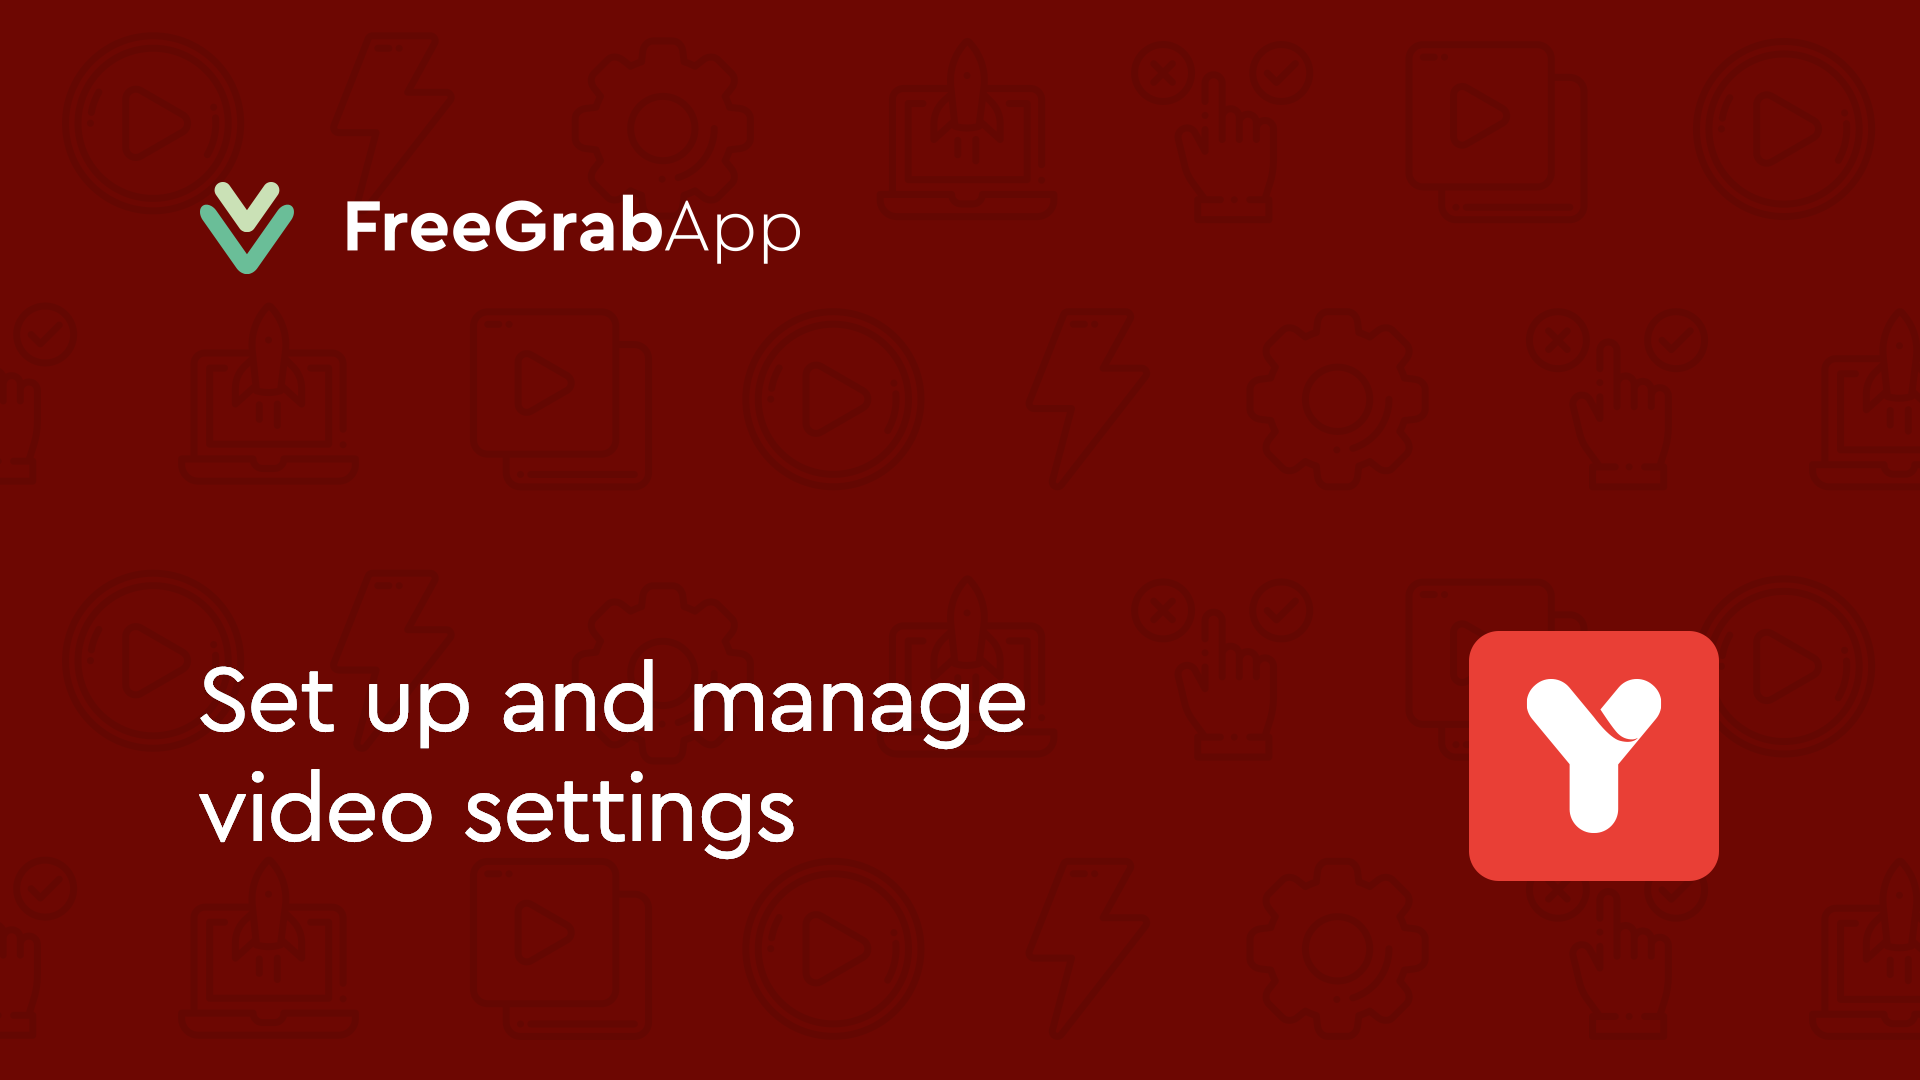 Free YouTube Download – Set up and manage video settings